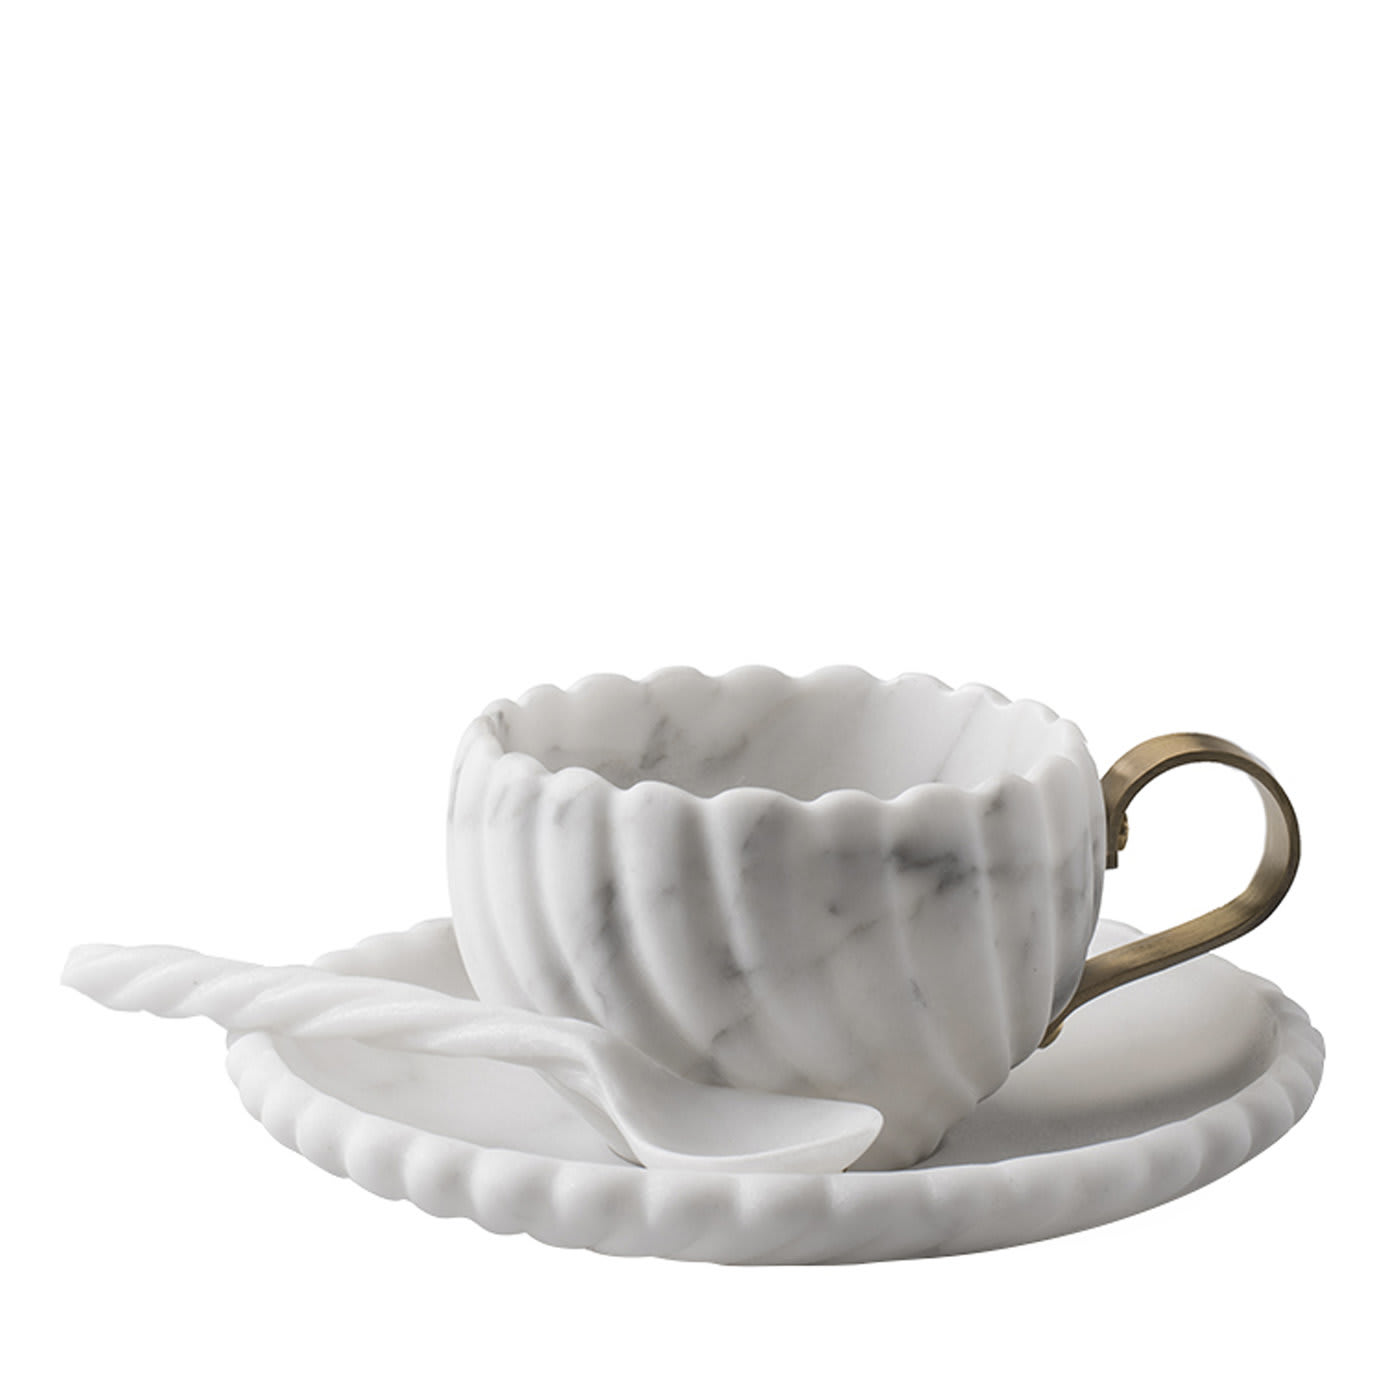 Victoria Teacup and Saucer Set by Bethan Gray - Editions Milano